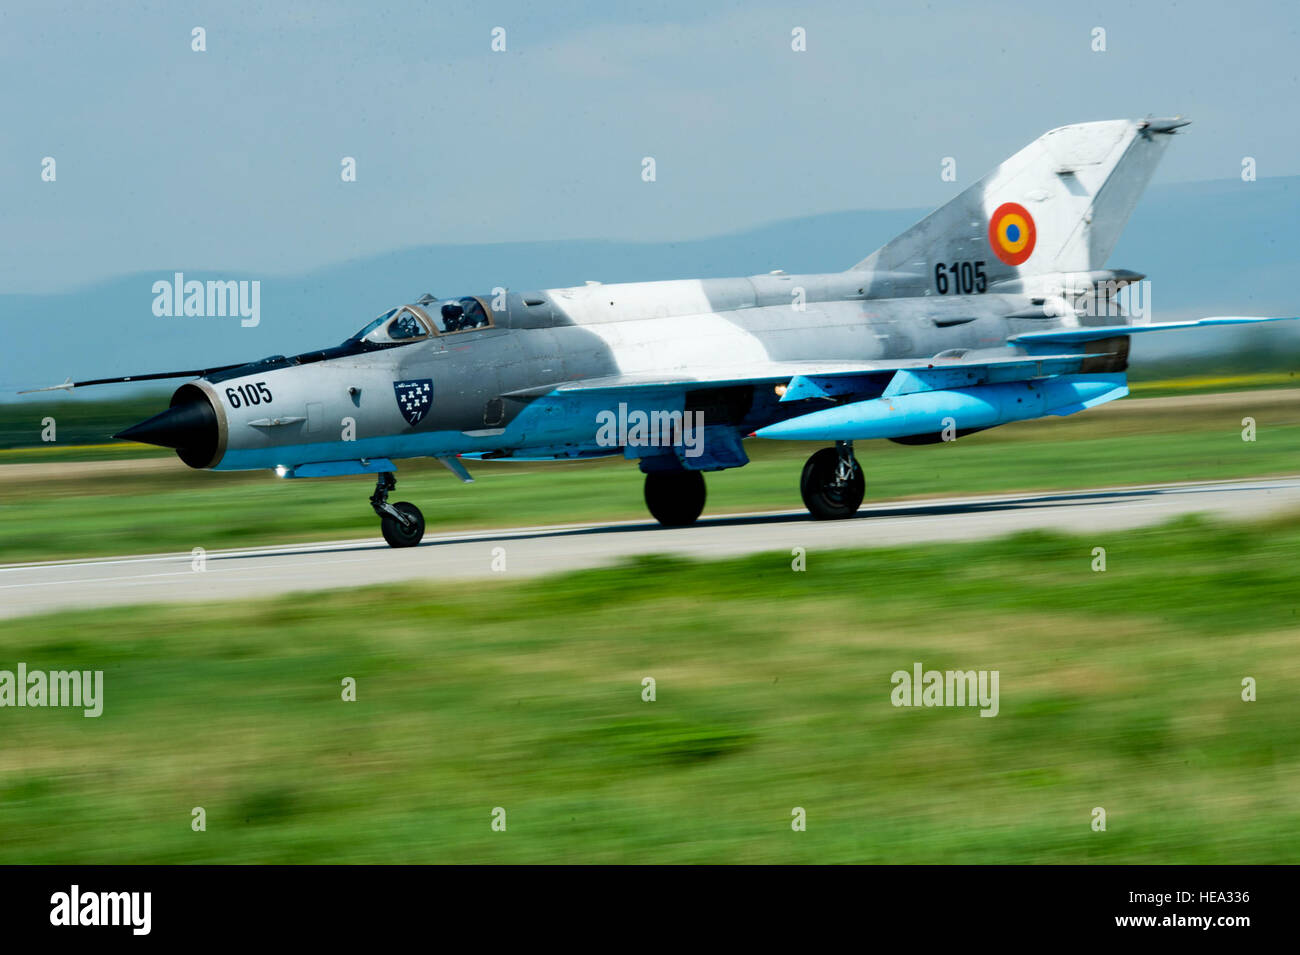 A Romanian air force MiG-21 LanceR fighter aircraft takes off from the flightline during the RoAF's 71st Air Base's air show and open house at Campia Turzii, Romania, July 23, 2016. The aviation demonstration took place during the middle of the U.S. Air Force's 194th Expeditionary Fighter Squadron's six-month long theater security package deployment to Europe in support of Operation Atlantic Resolve, which aims to bolster the U.S.'s continued commitment to the collective security of NATO and dedication to the enduring peace and stability in the region. The unit, comprised of more than 200 CANG Stock Photo